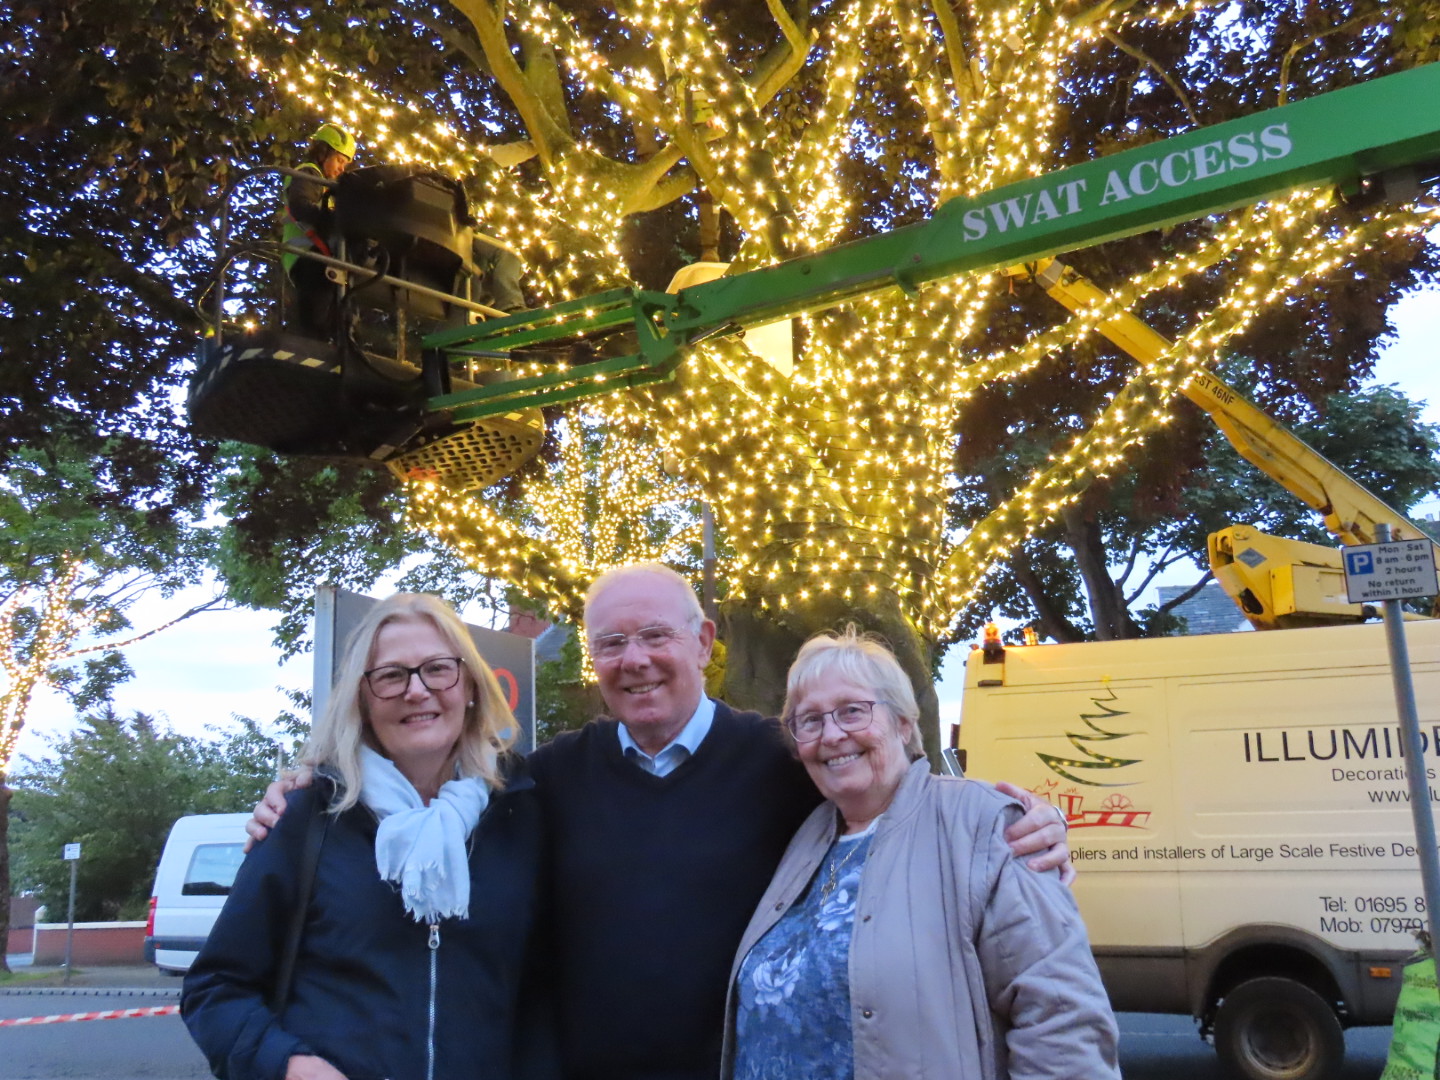 Ainsdale Village in Southport has been lit up with 70,000 new lights thanks to Ainsdale Civic Society and IllumiDex UK Ltd. Trish Ashcroft, Tony Brough and Joan Major from Ainsdale Civic Society celebrate the completion of the project. Photo by Andrew Brown Media